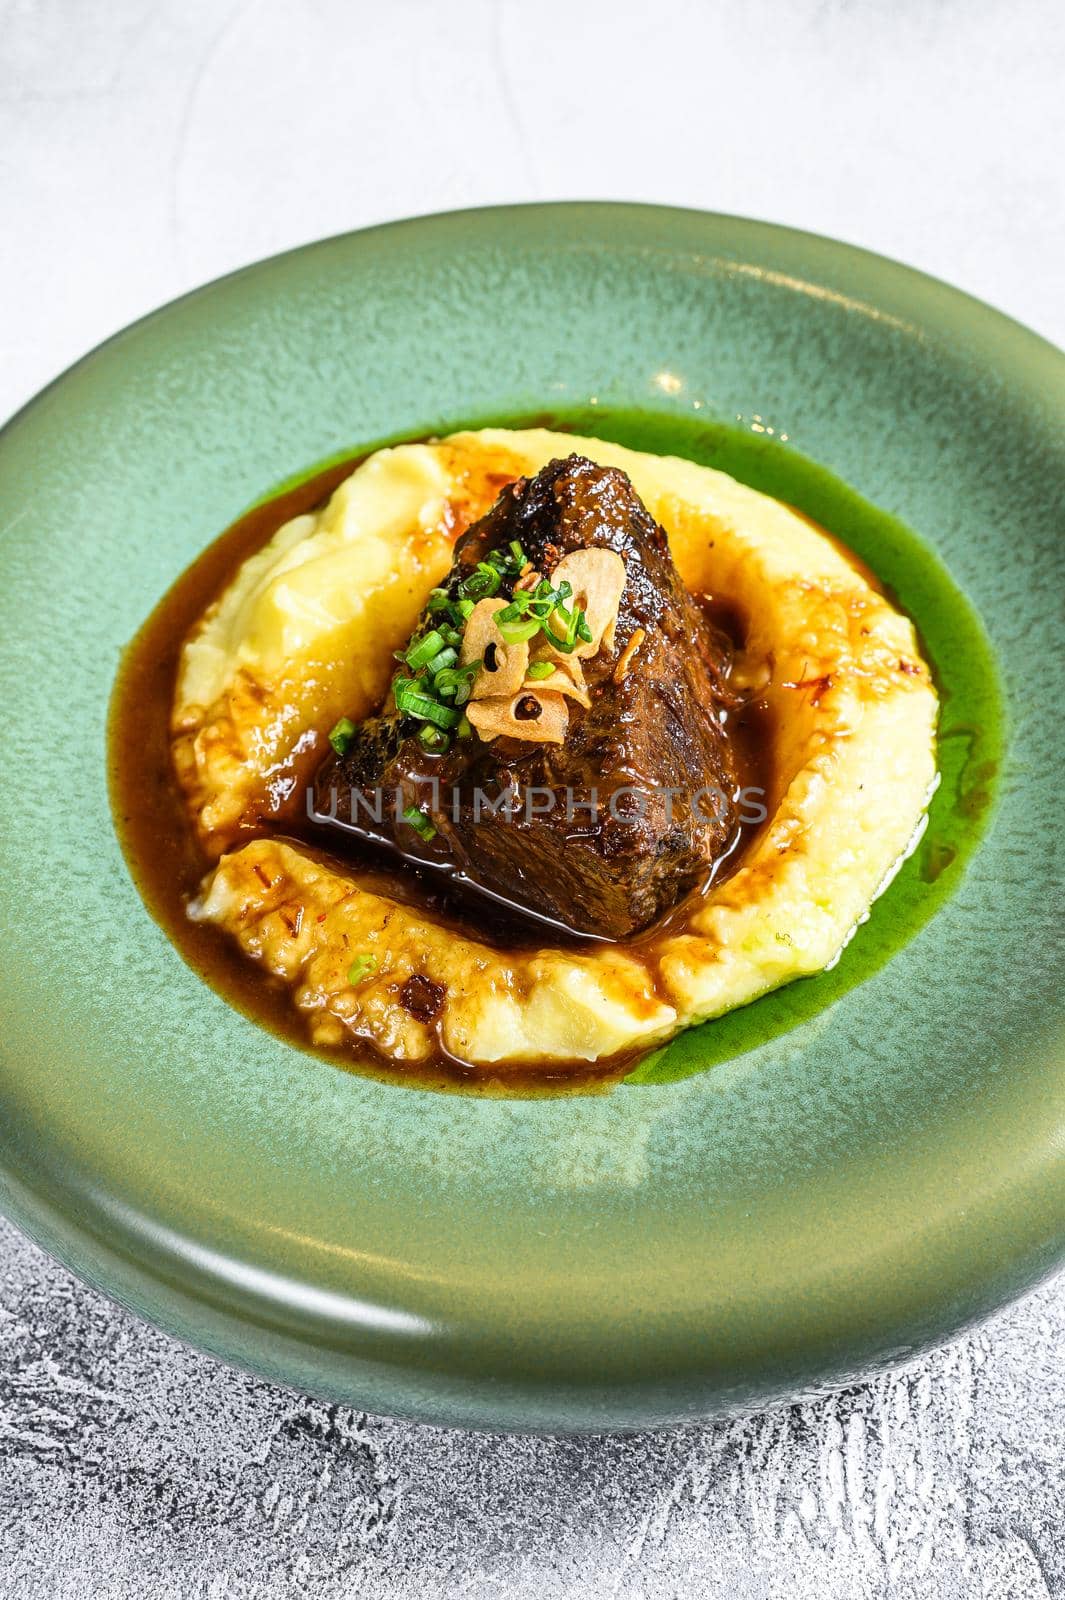 Beef sirloin fillet steak with a side dish of mashed potatoes. Gray background. Top view. Copy space by Composter